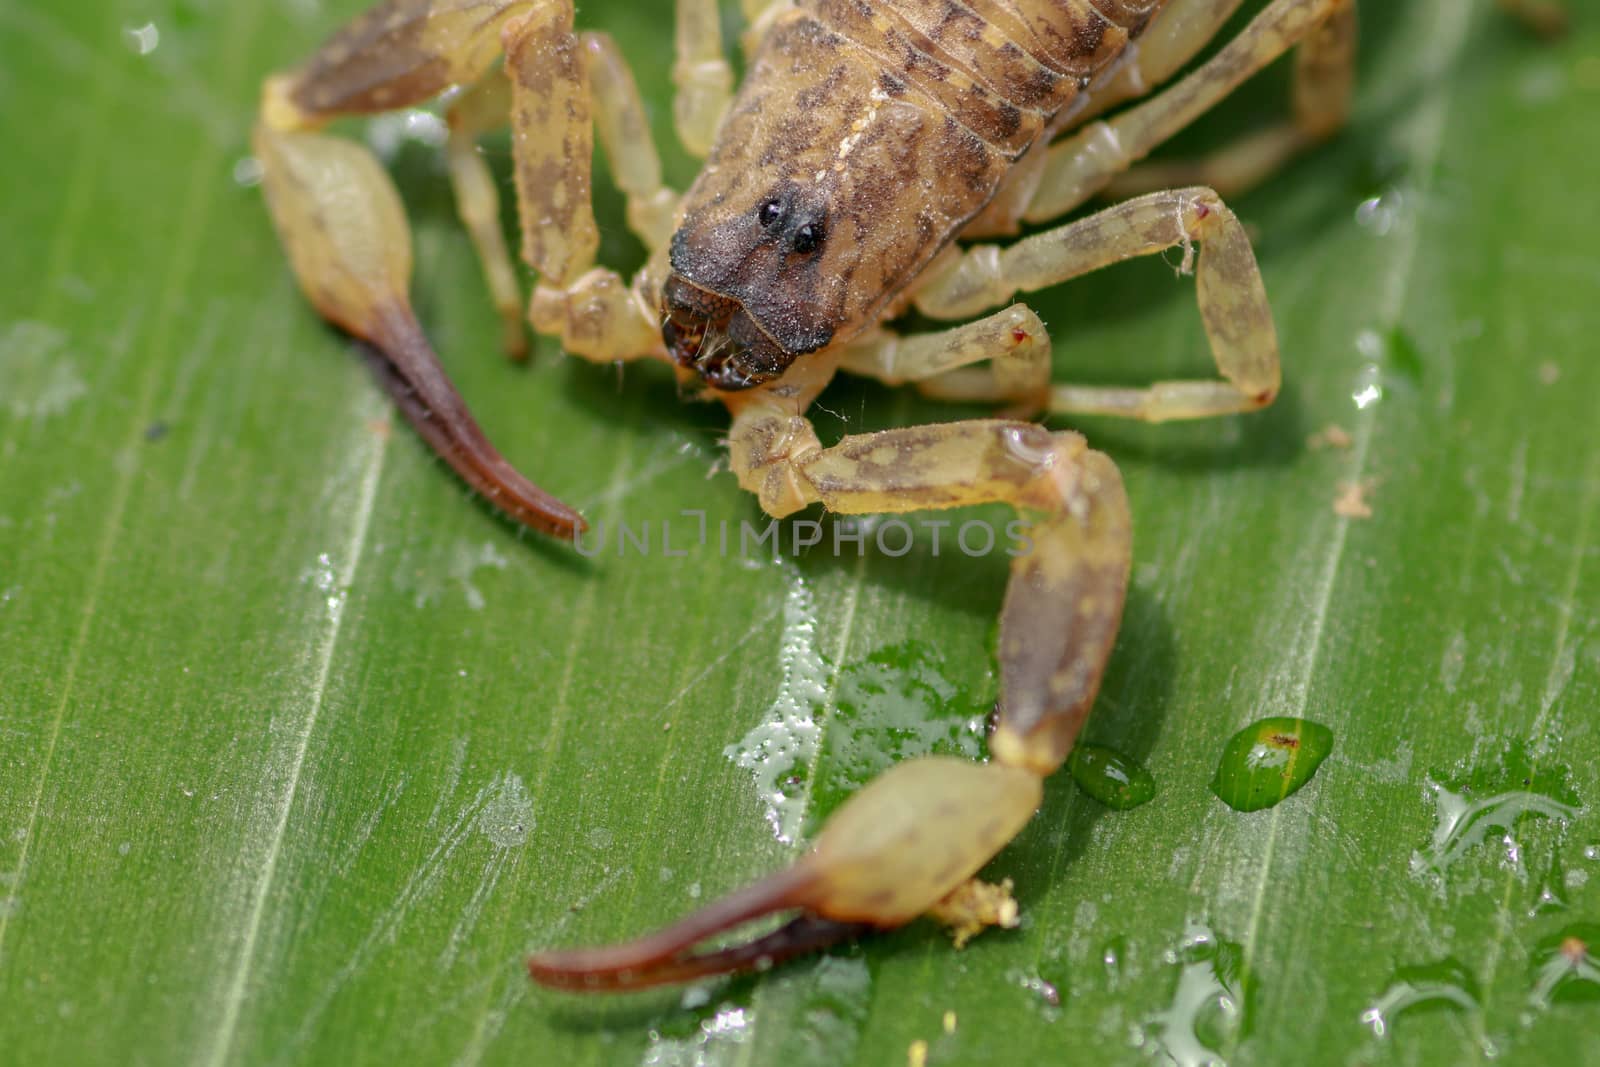 A scorpion pincer pedipalp up close. Swimming Scorpion, Chinese swimming scorpion or Ornate Bark Scorpion on a leaf in a tropical jungle by Sanatana2008